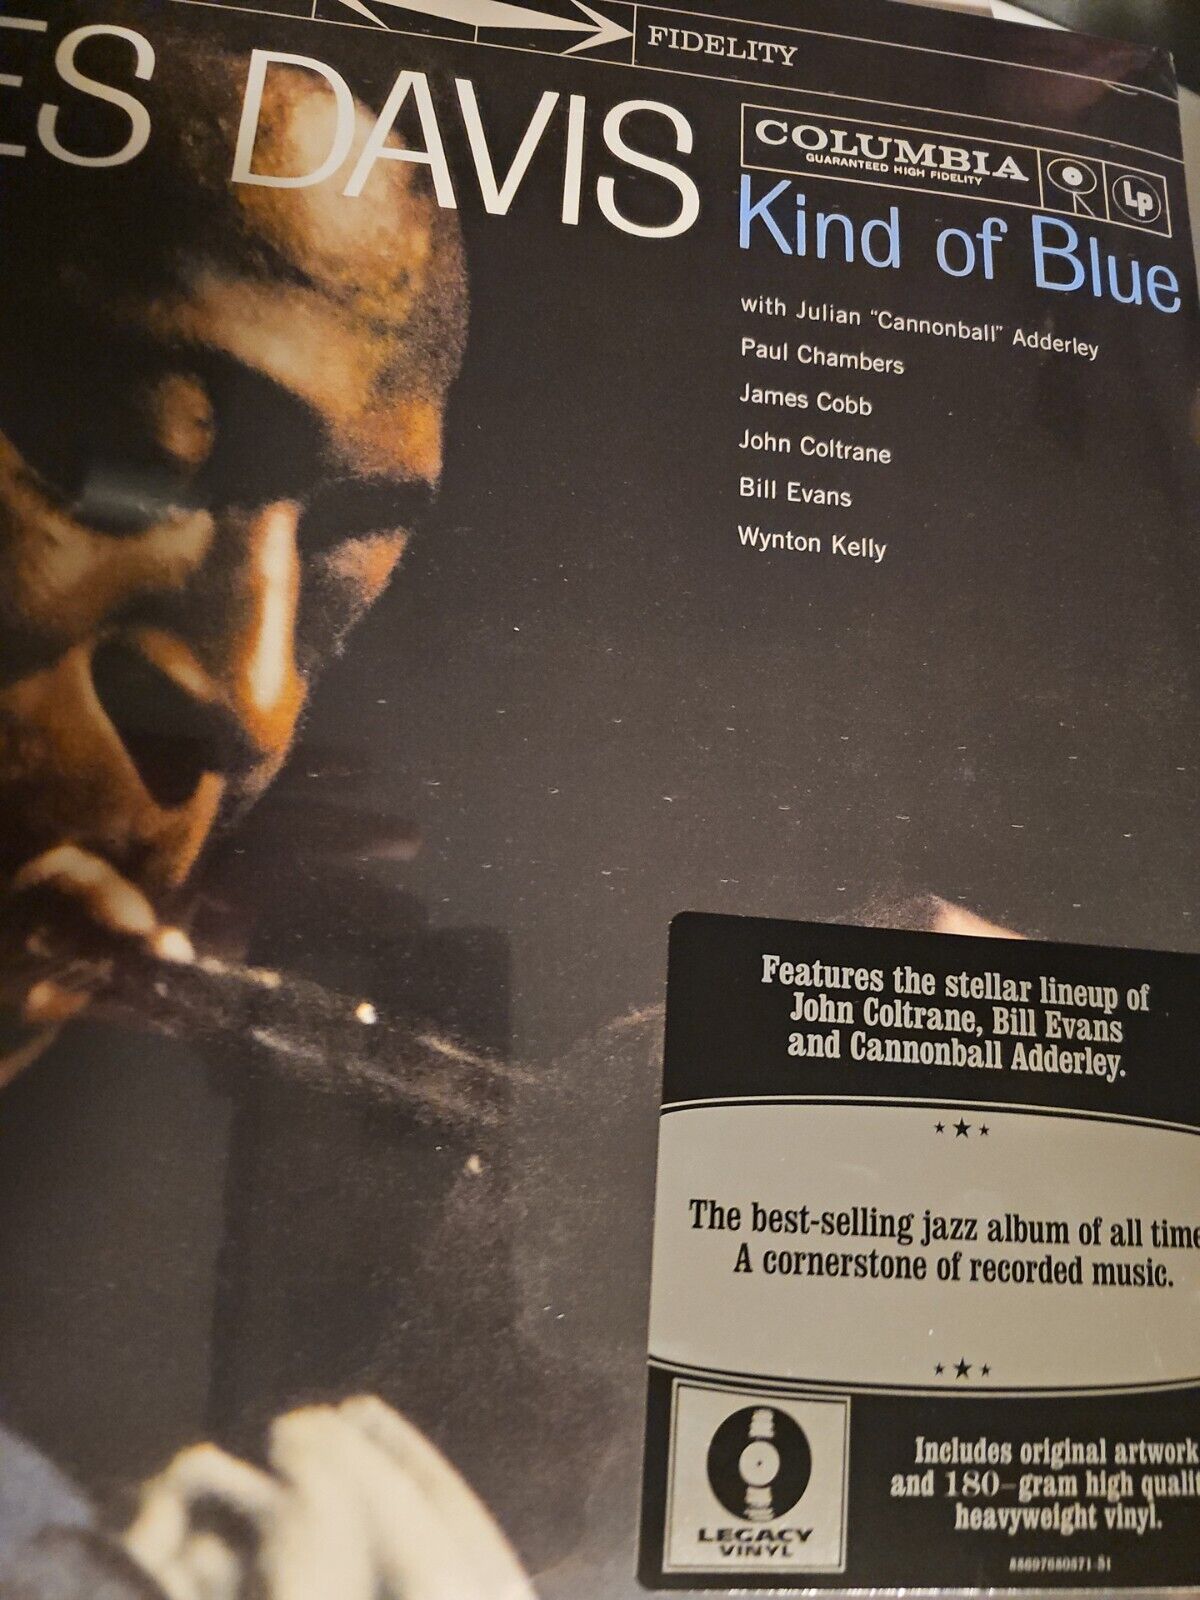 Kind of Blue by Paul Chambers (Record, 2010)